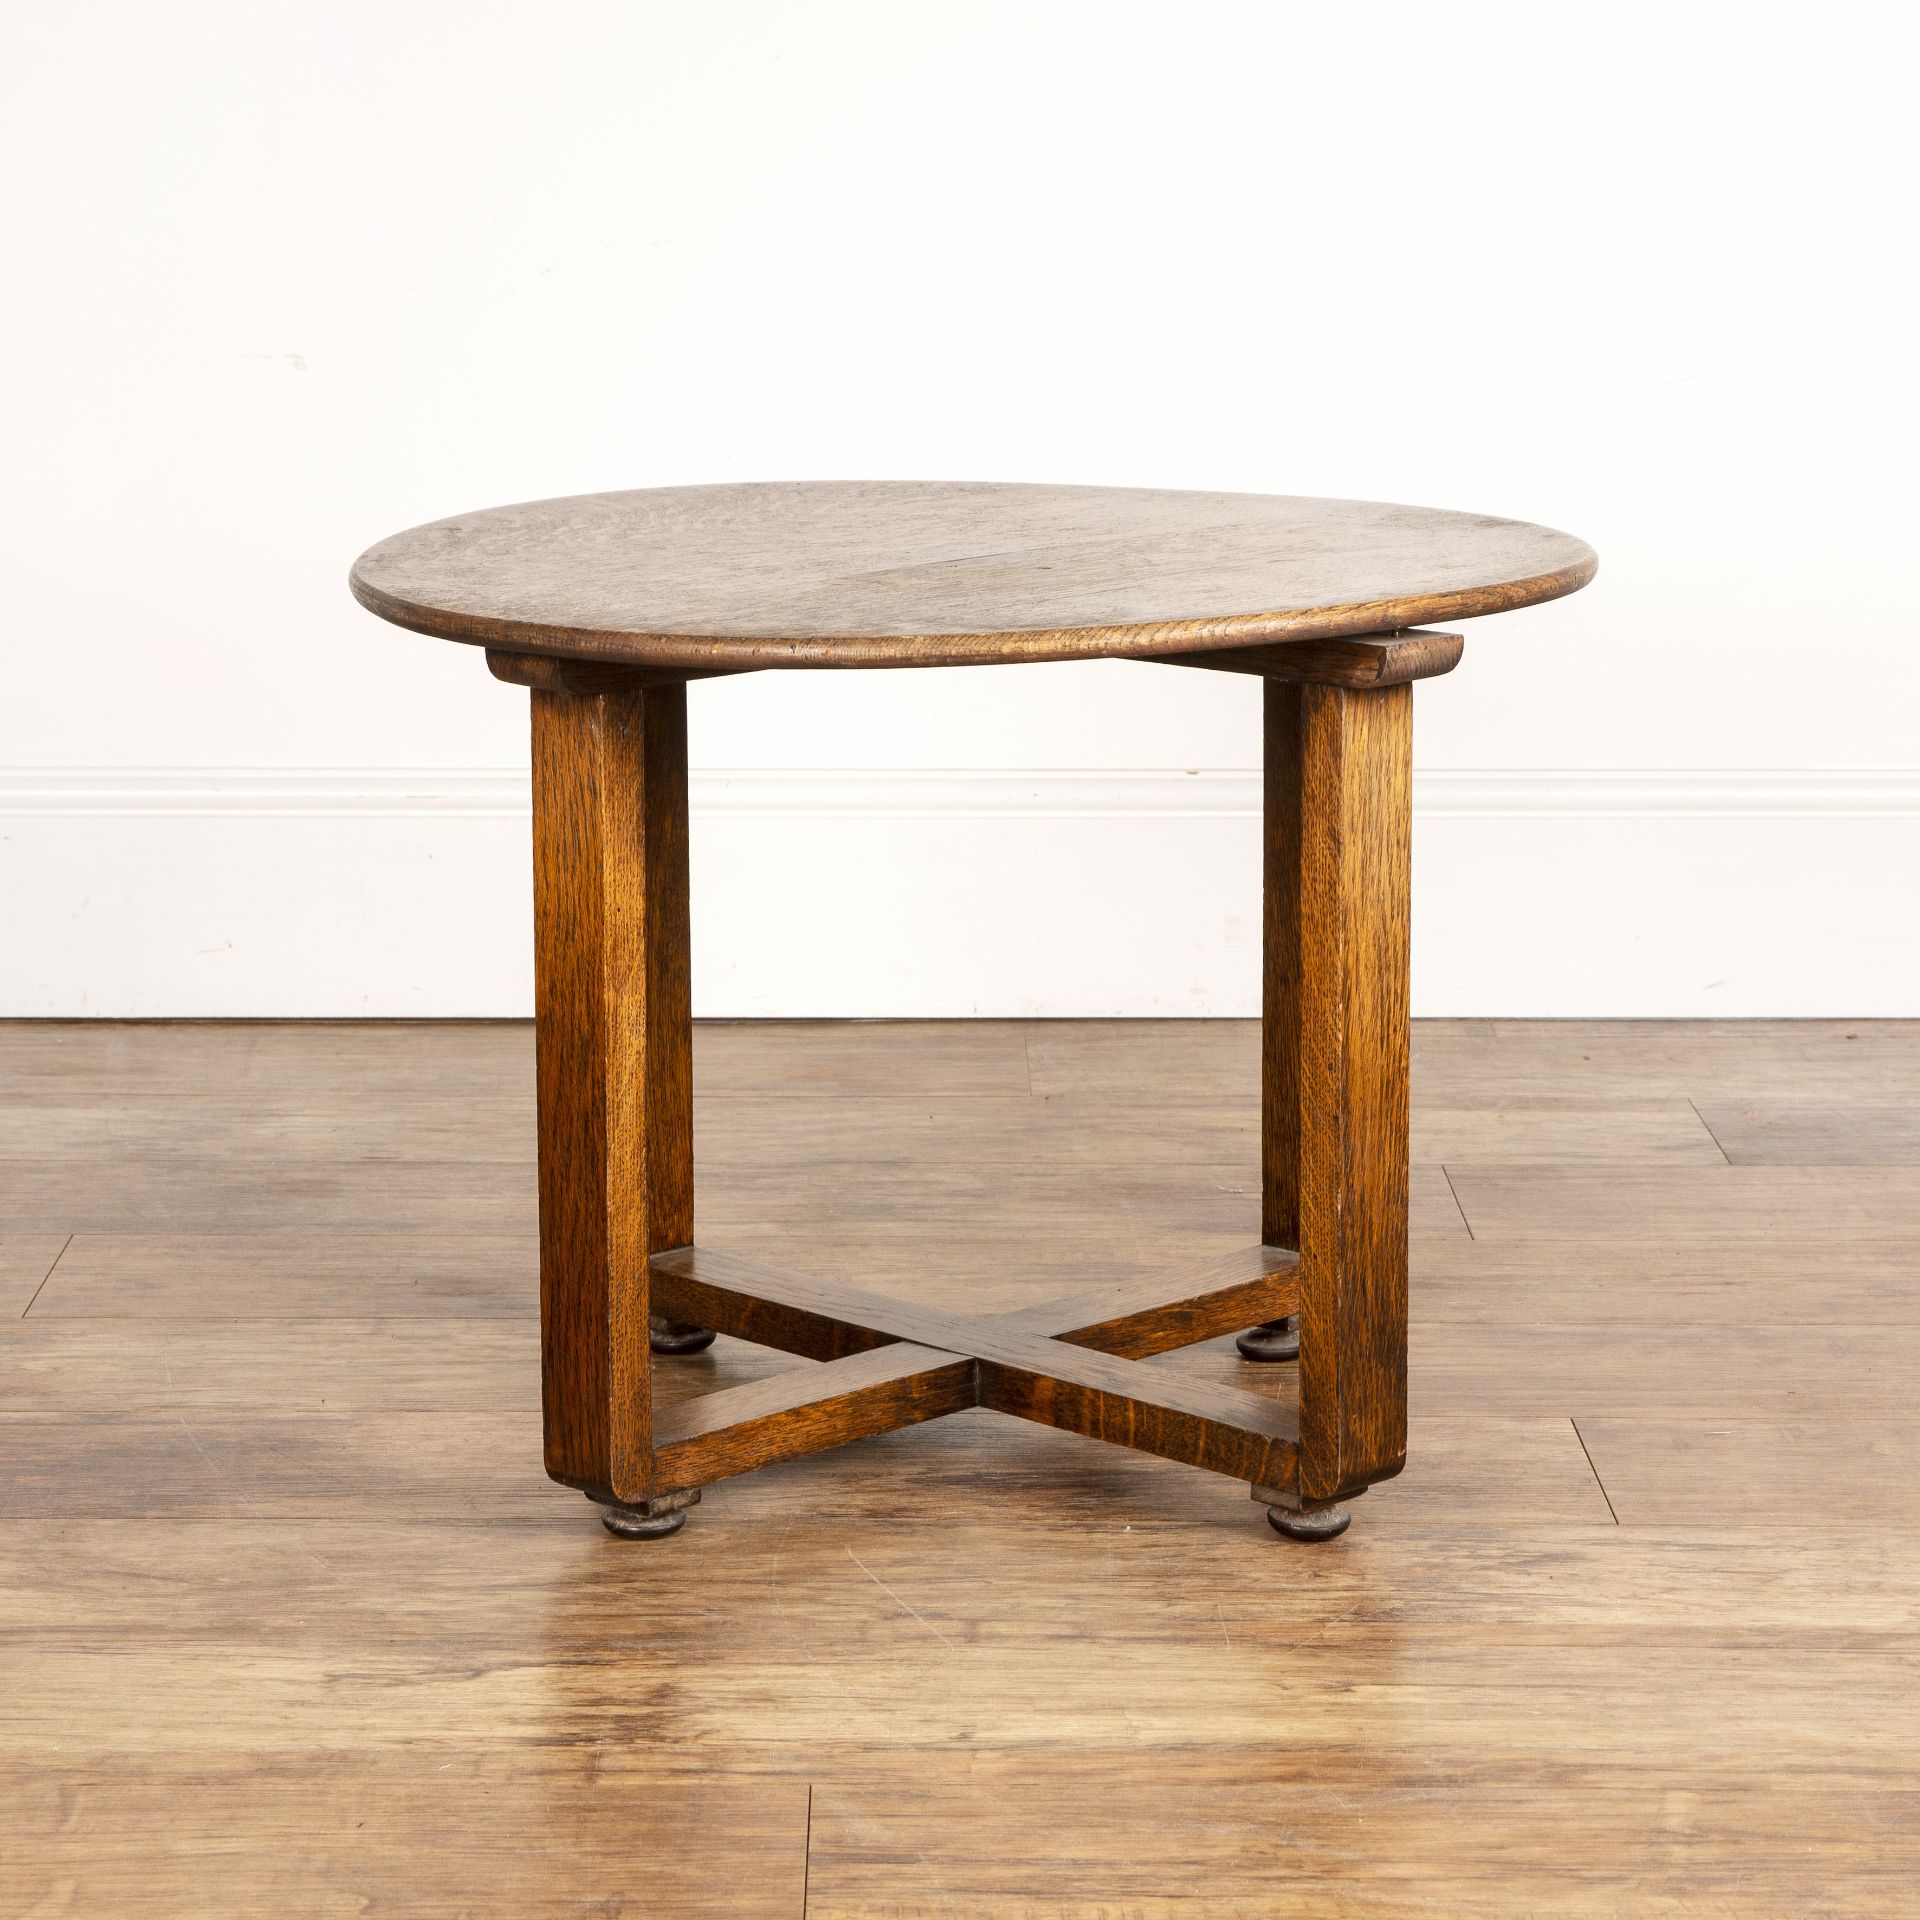 In the manner of Heals oak, circular topped table, unmarked, 60.5cm wide x 45cm high Overall signs